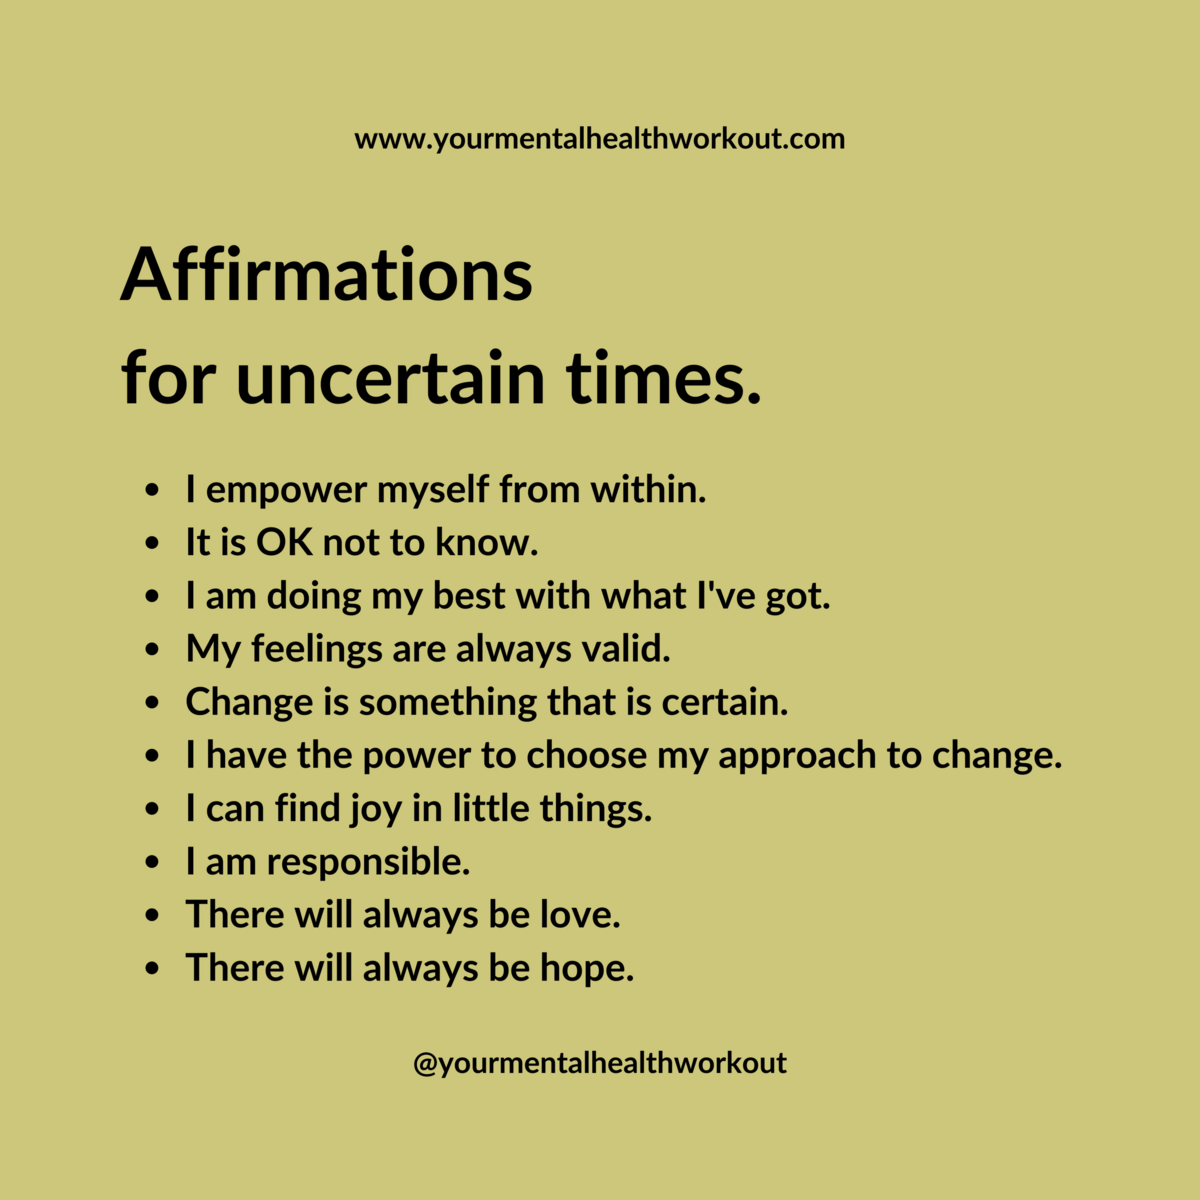 Affirmations for uncertaintimes (1)